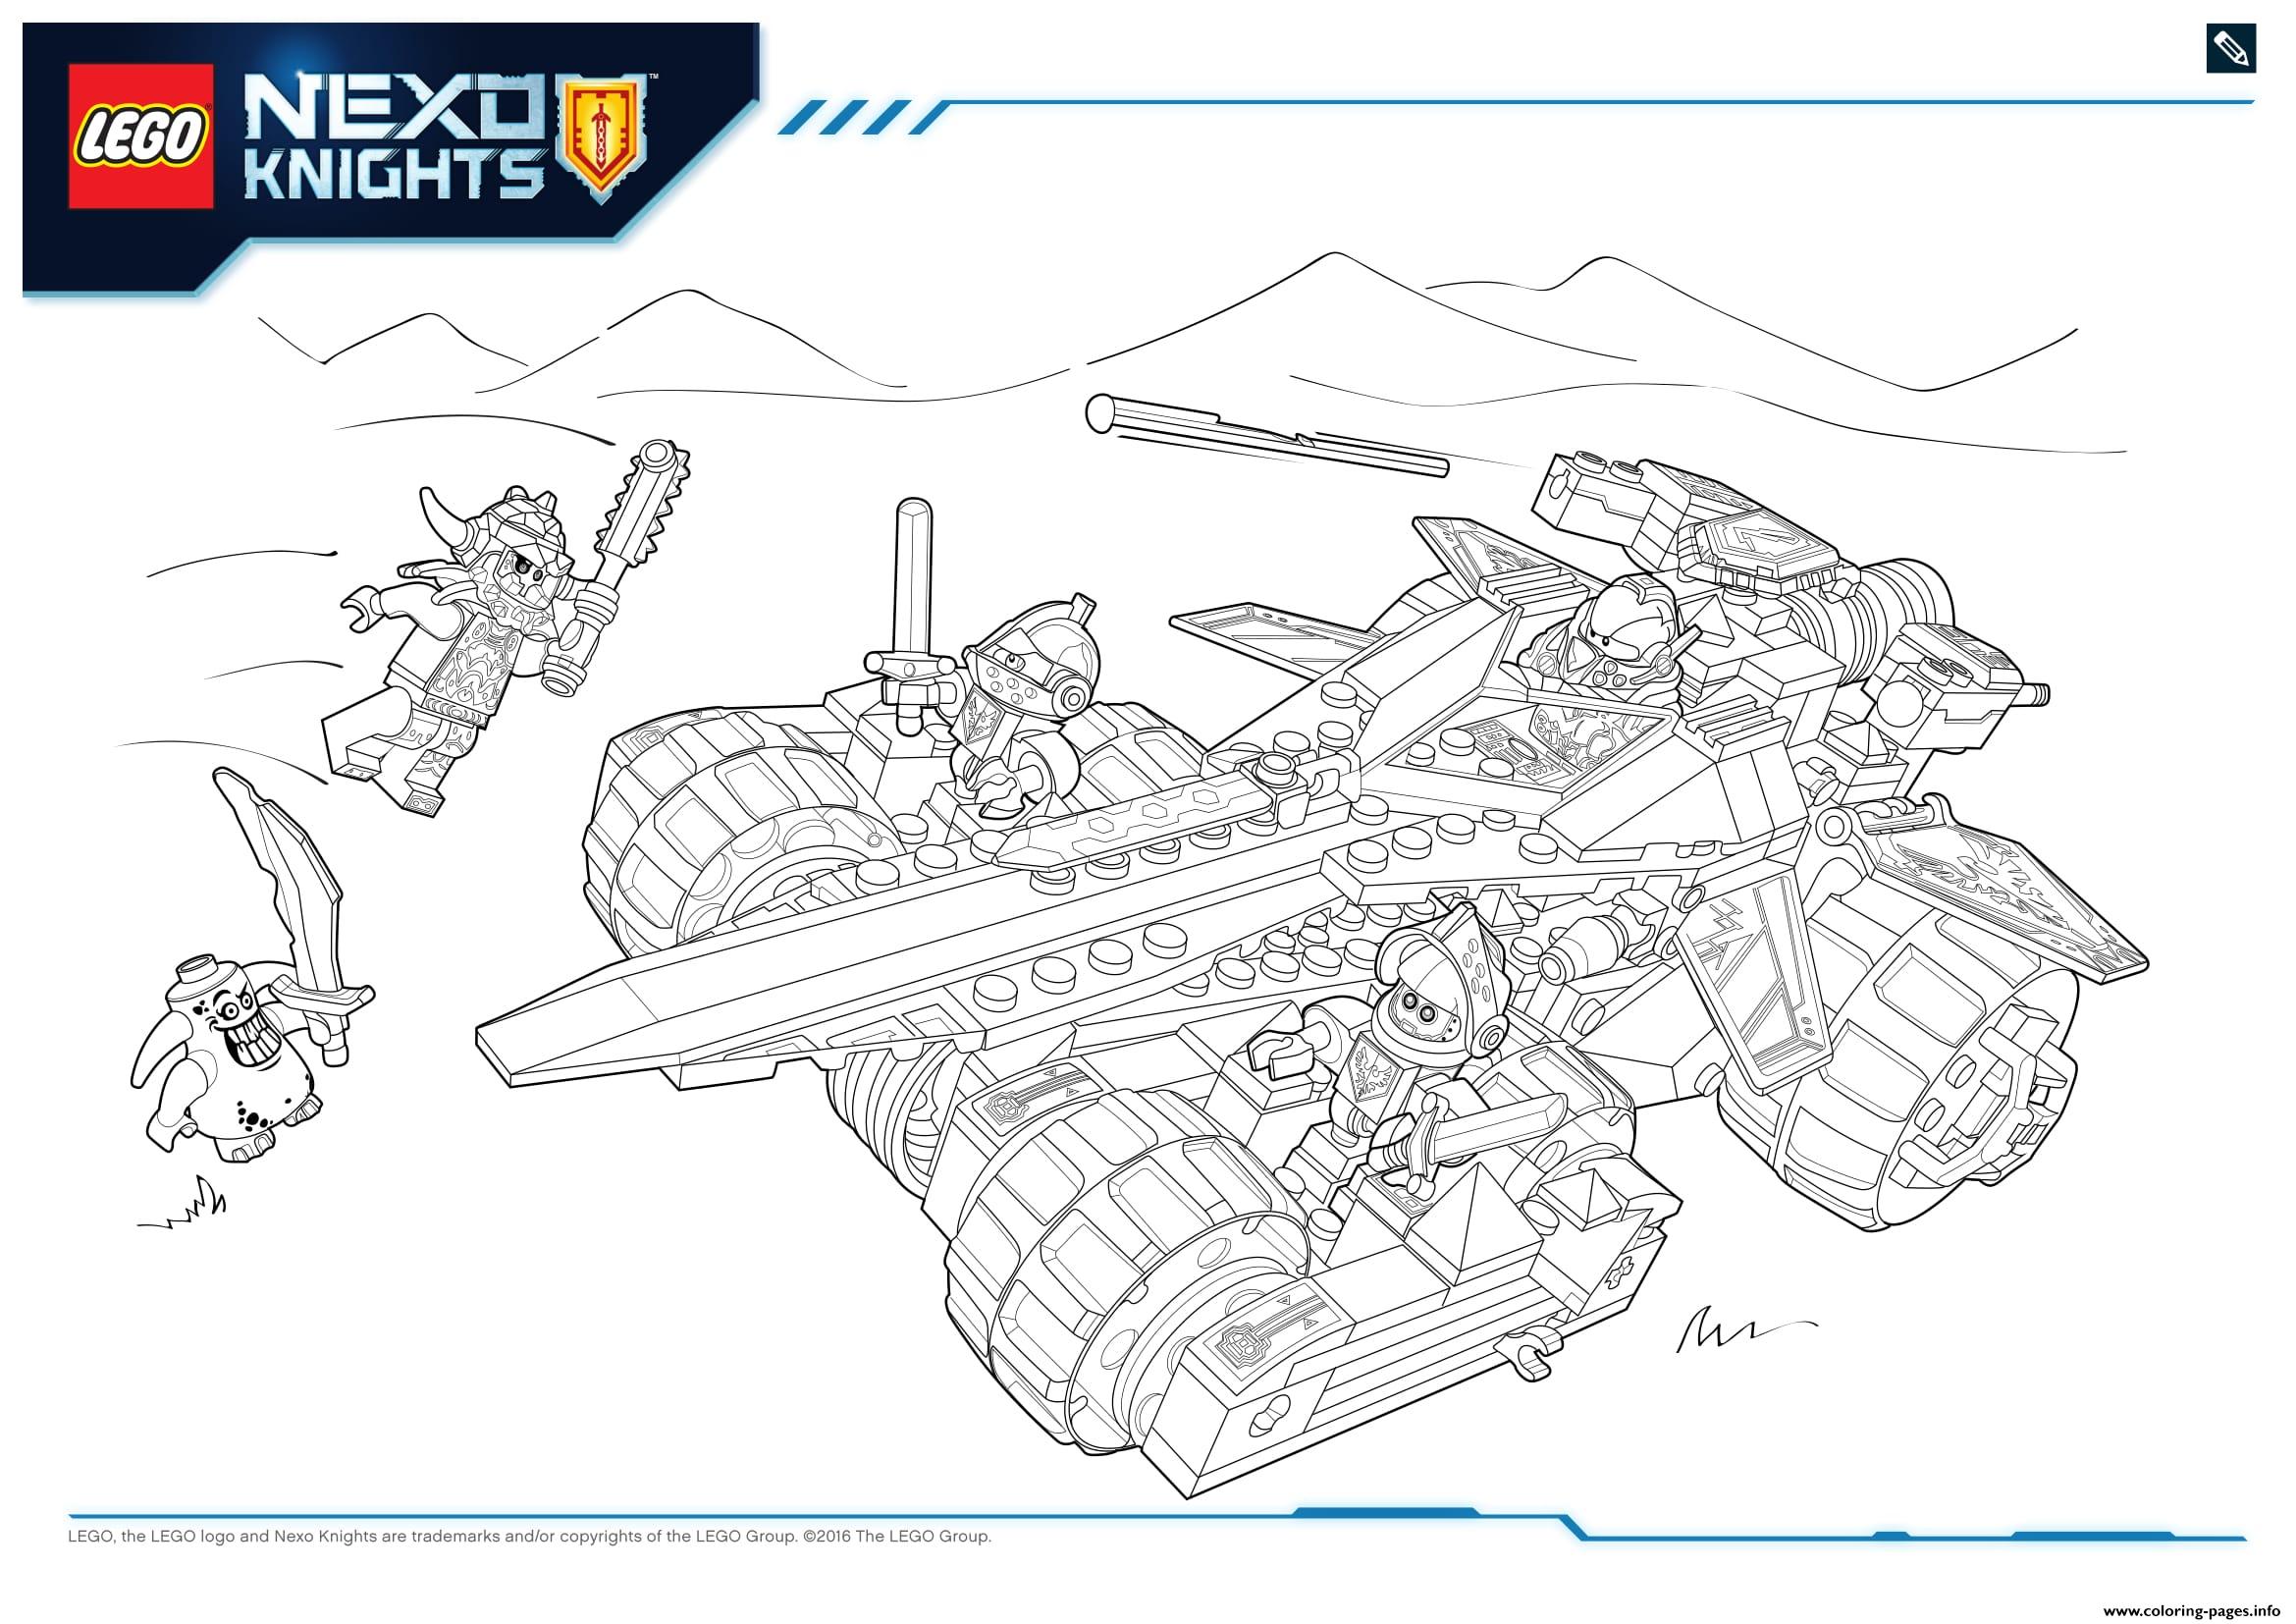 Lego NEXO KNIGHTS Products 4 coloring